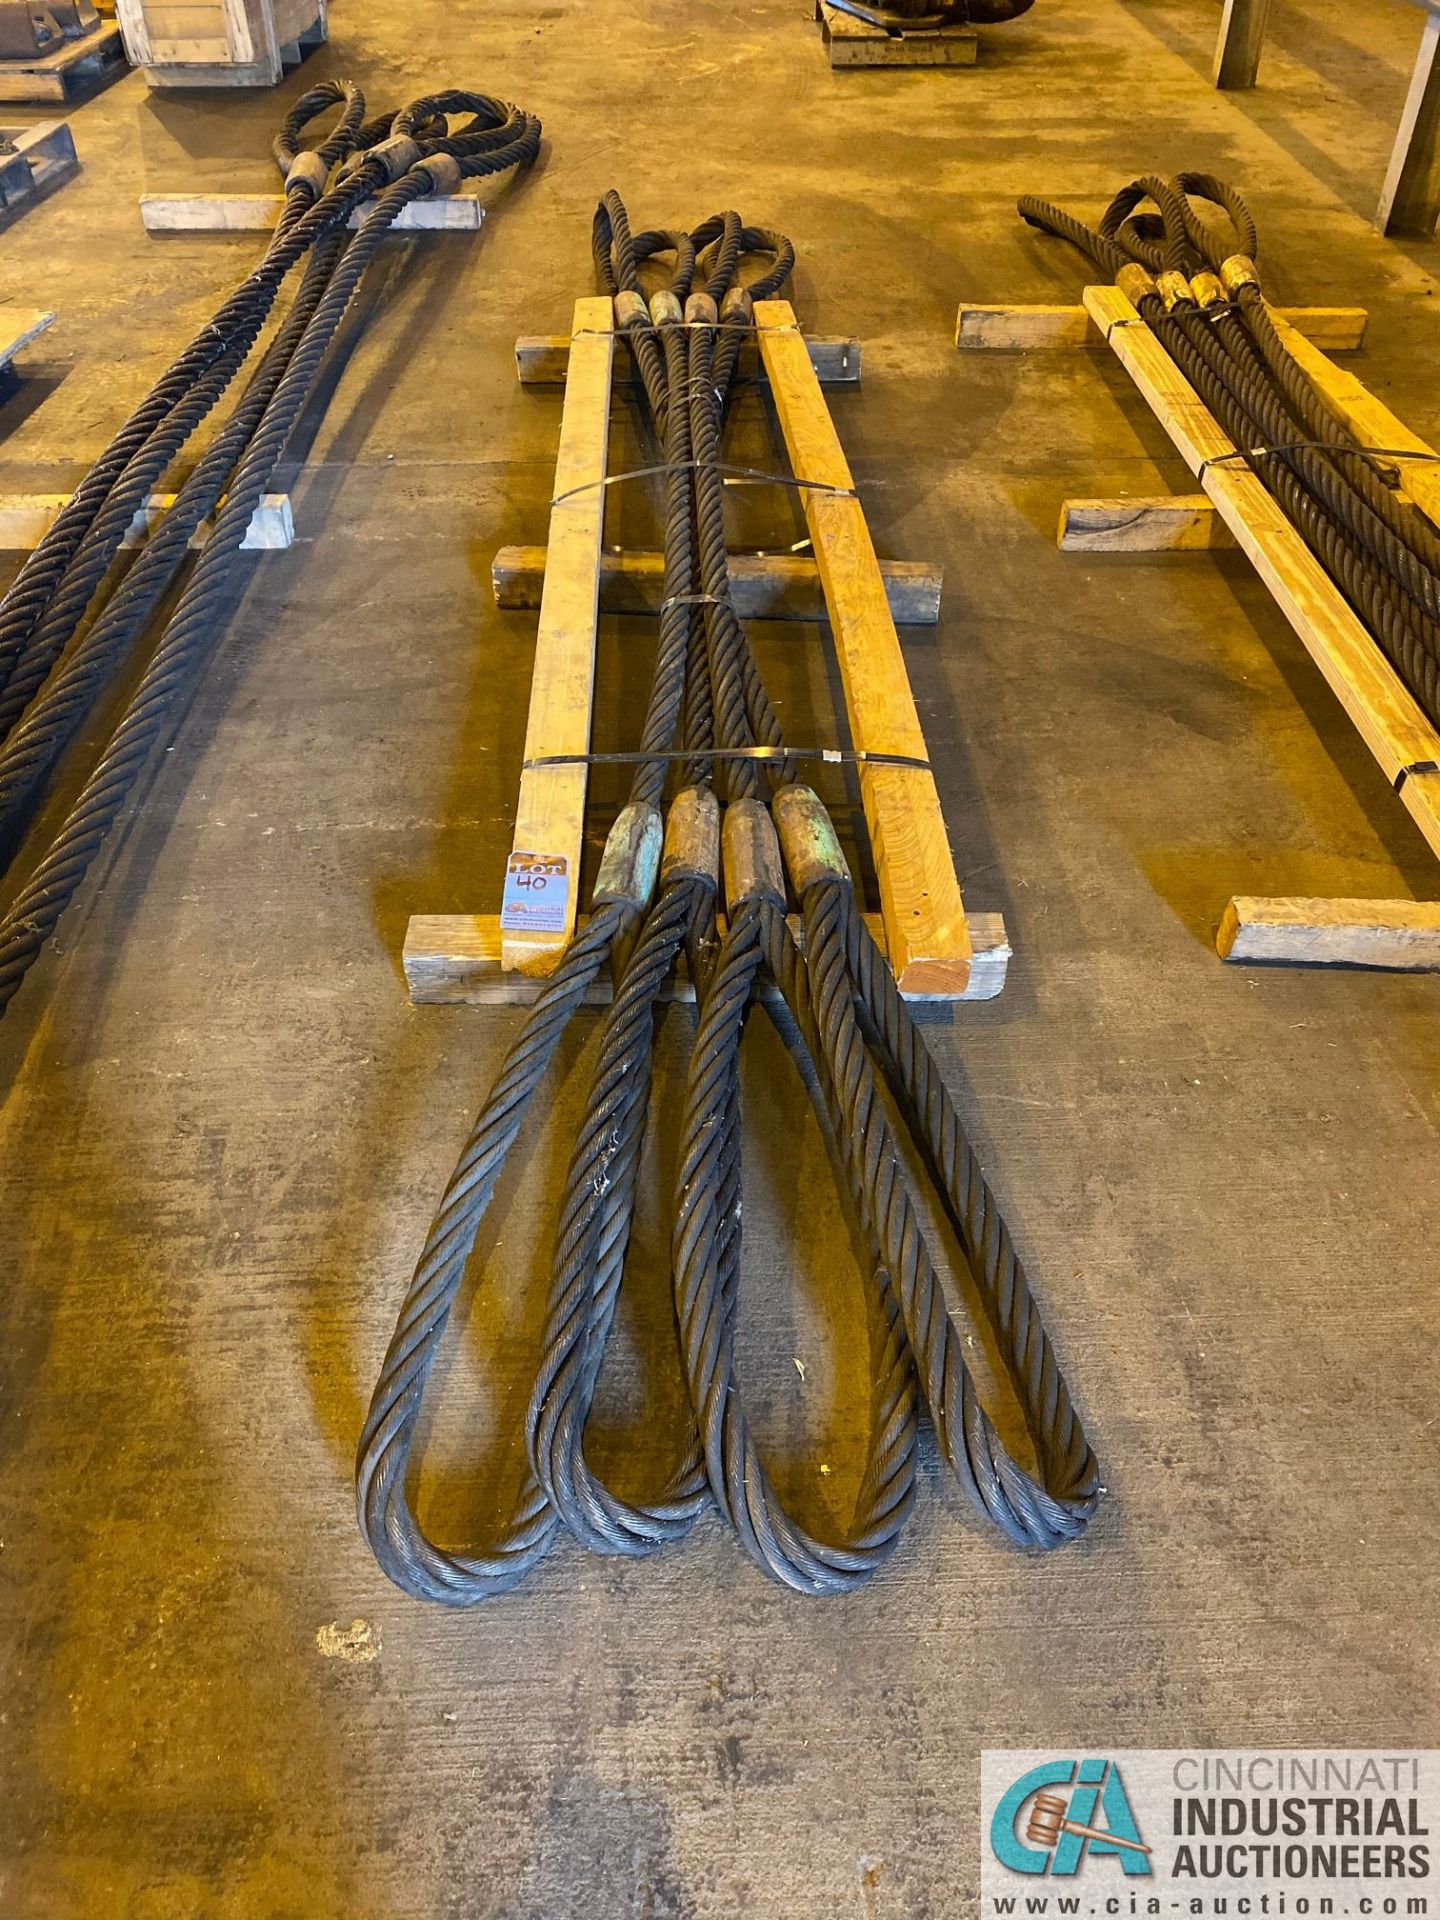 1-3/4" X 13' LIFTING CABLES